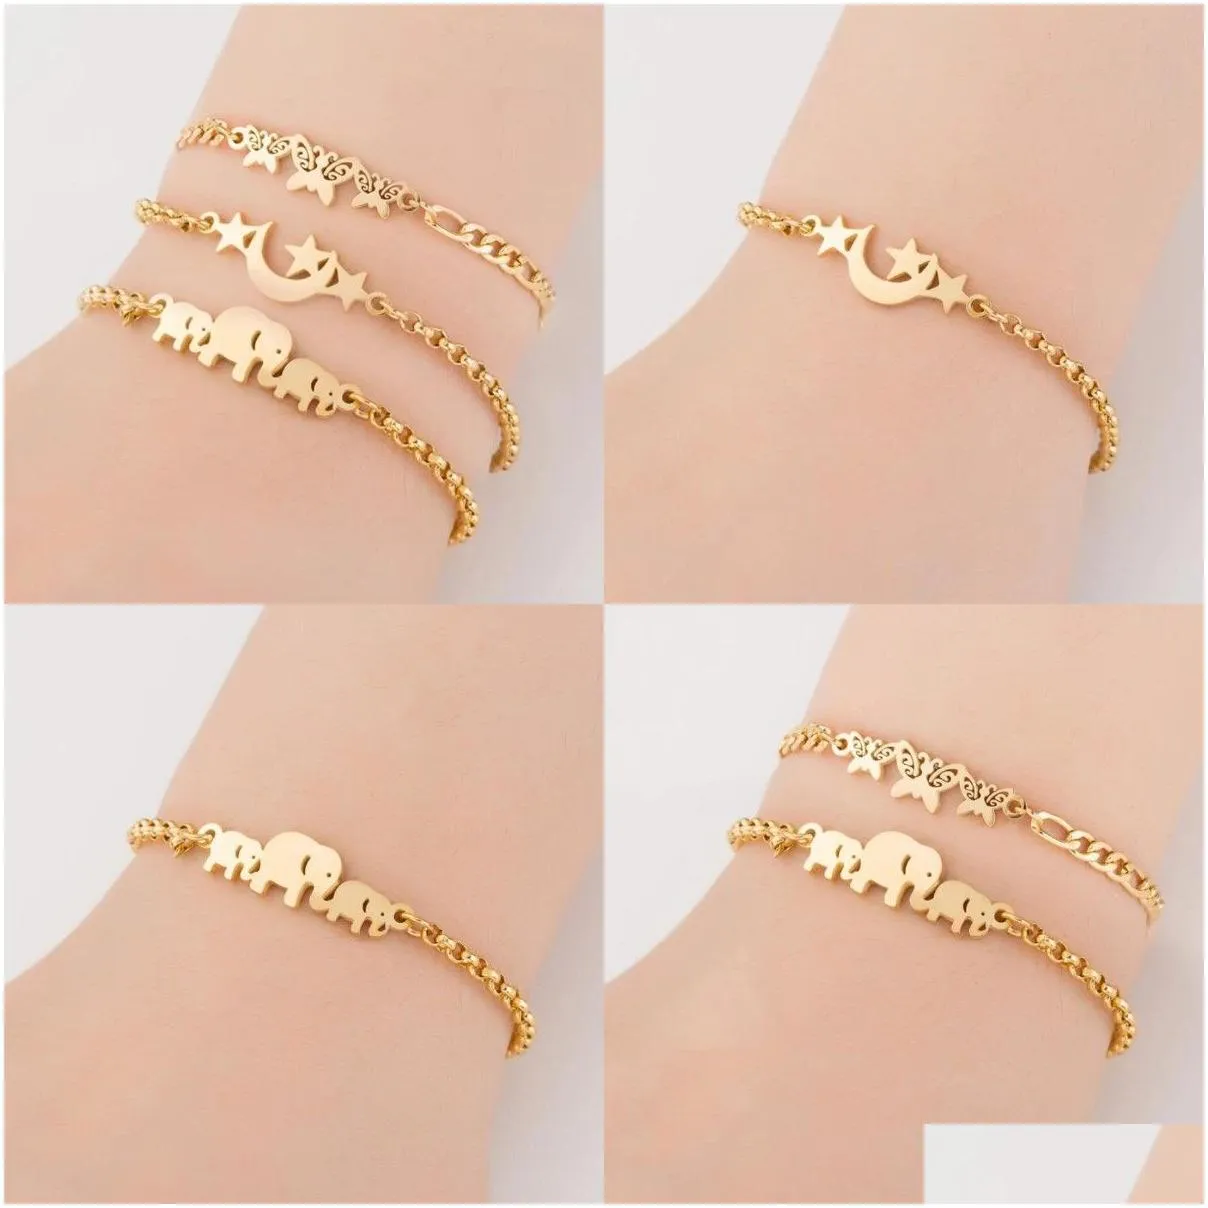 bohemia stainless steel butterfly charm bracelet for women fashion girls gold color elephant star moon wrist jewelry party wedding